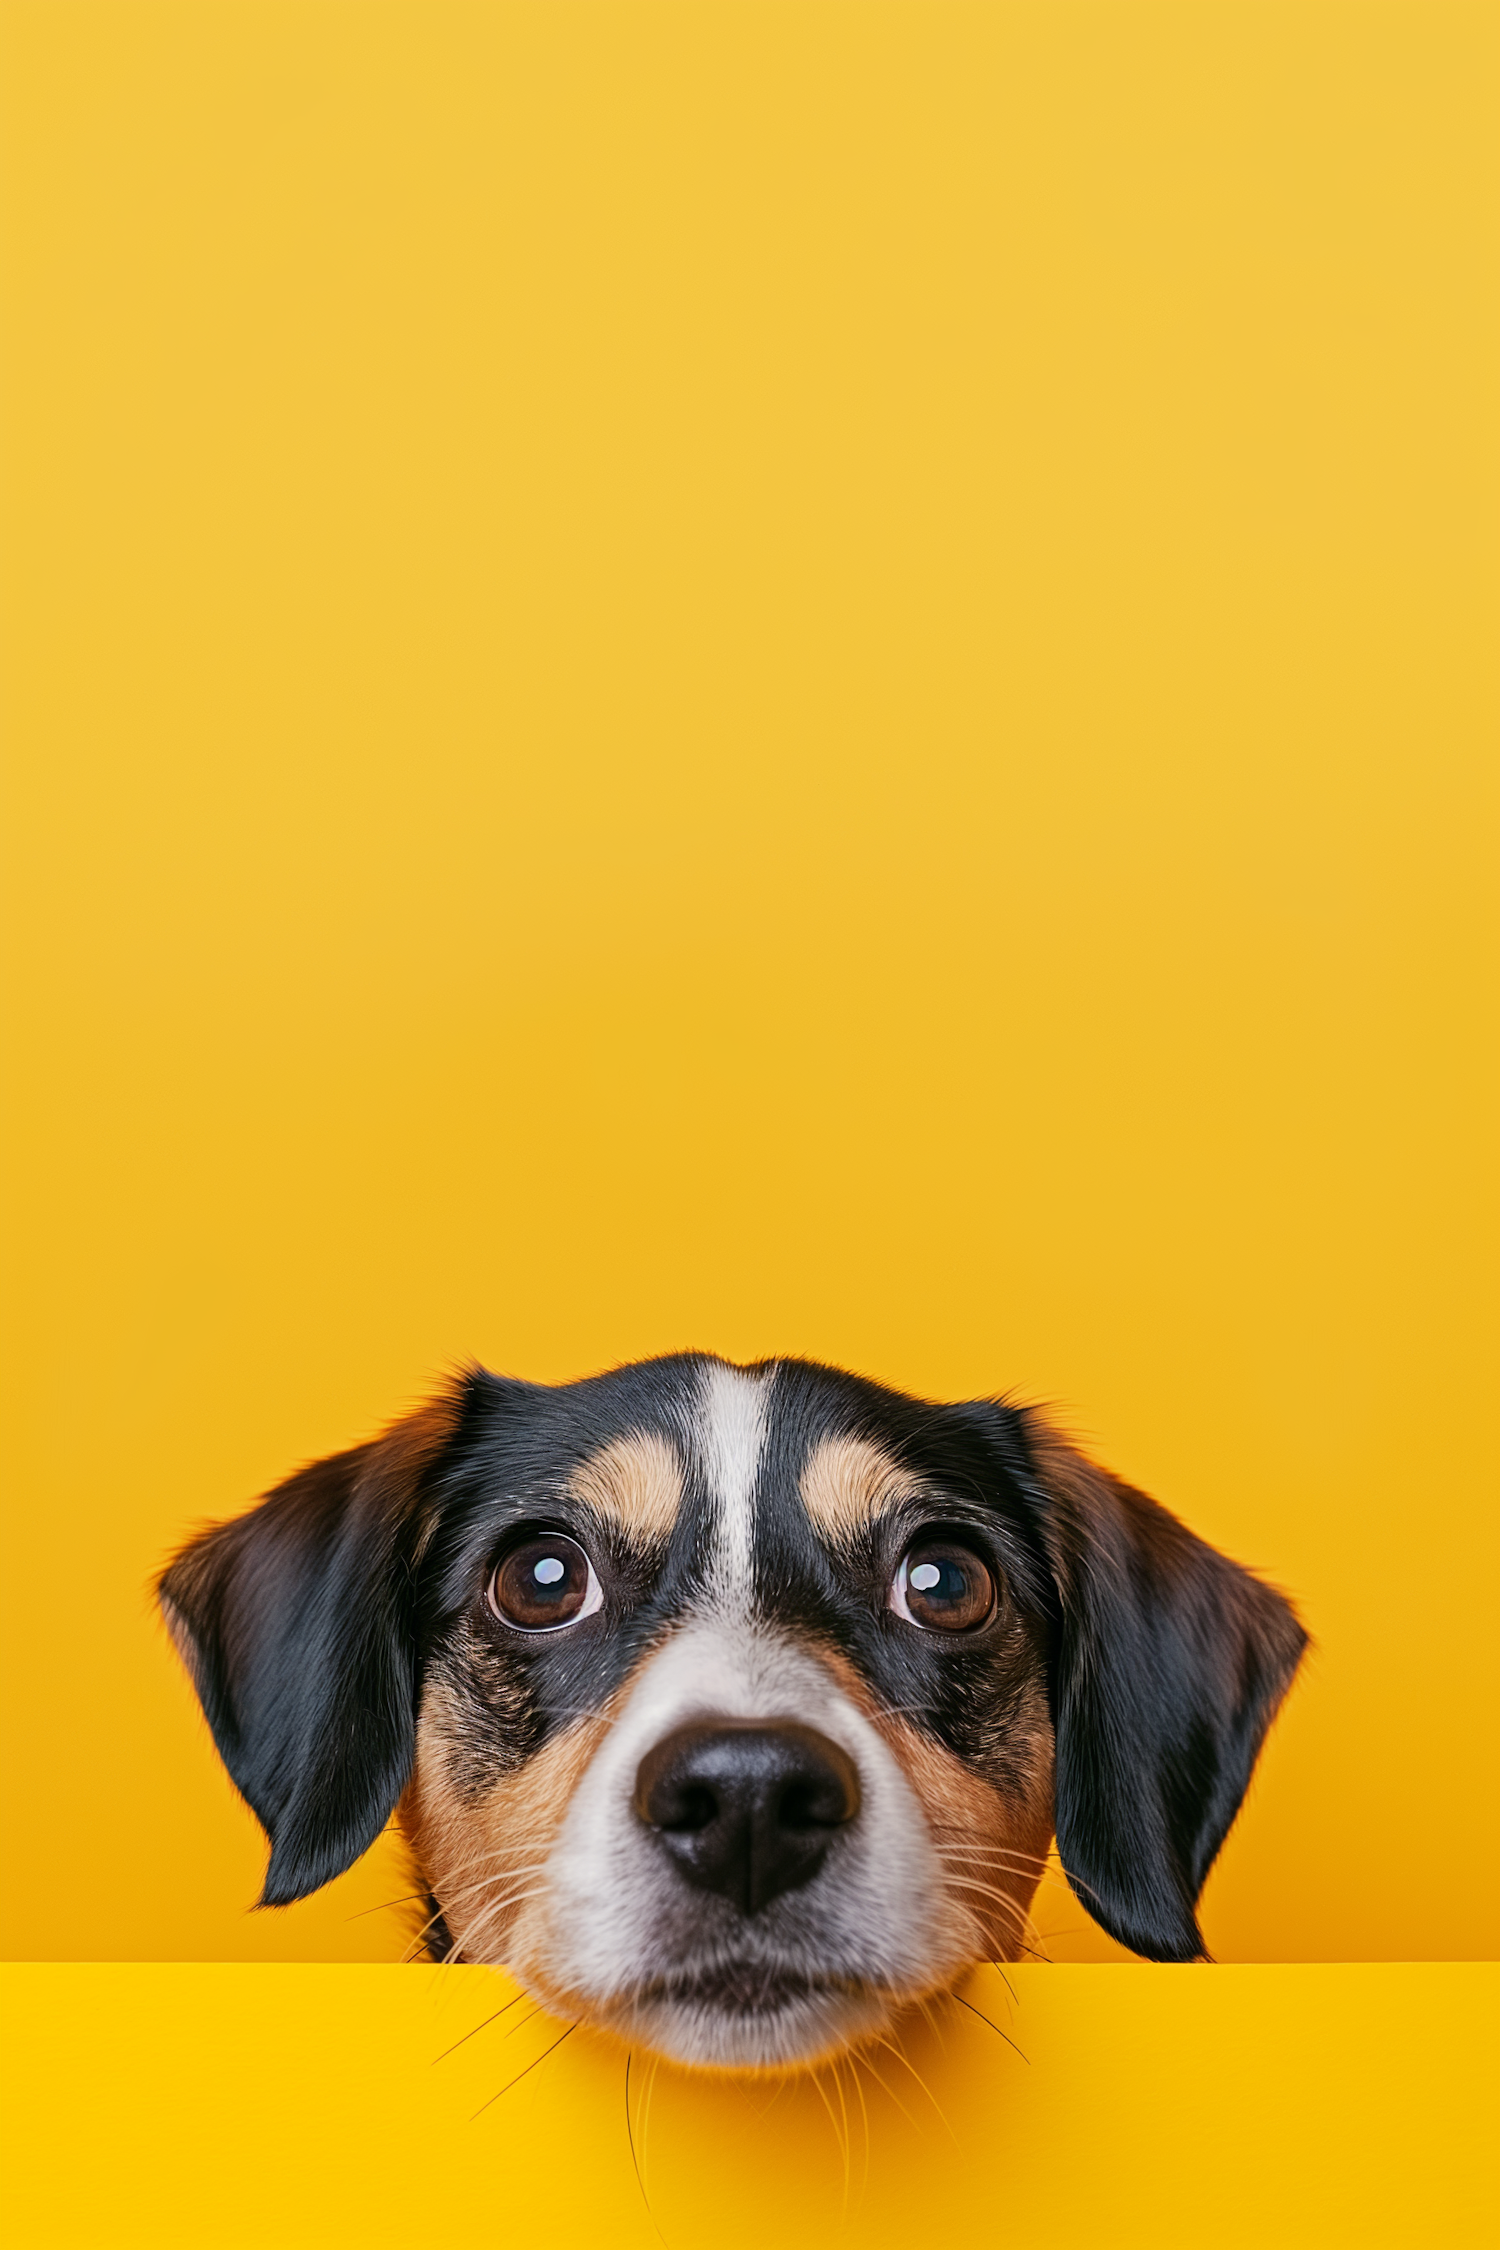 Charming Tricolor Dog on Yellow Background